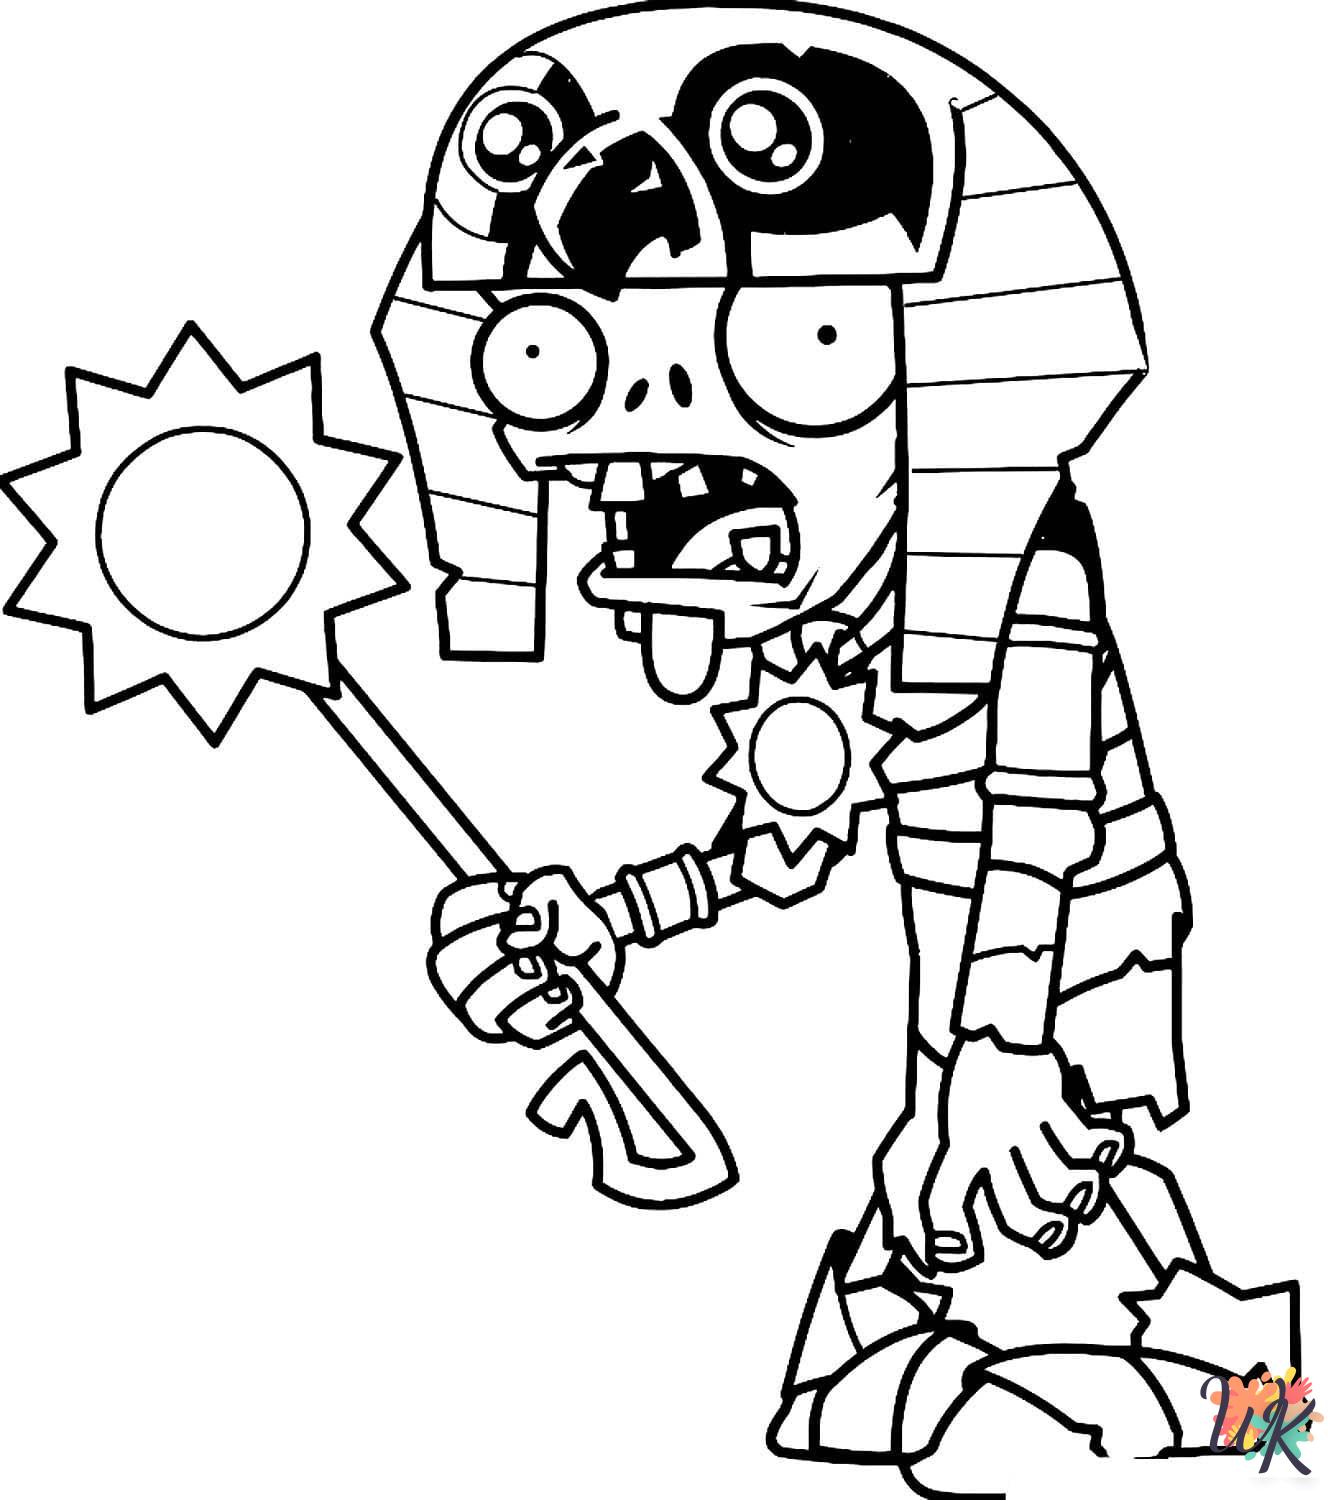 Mummy coloring pages easy 1